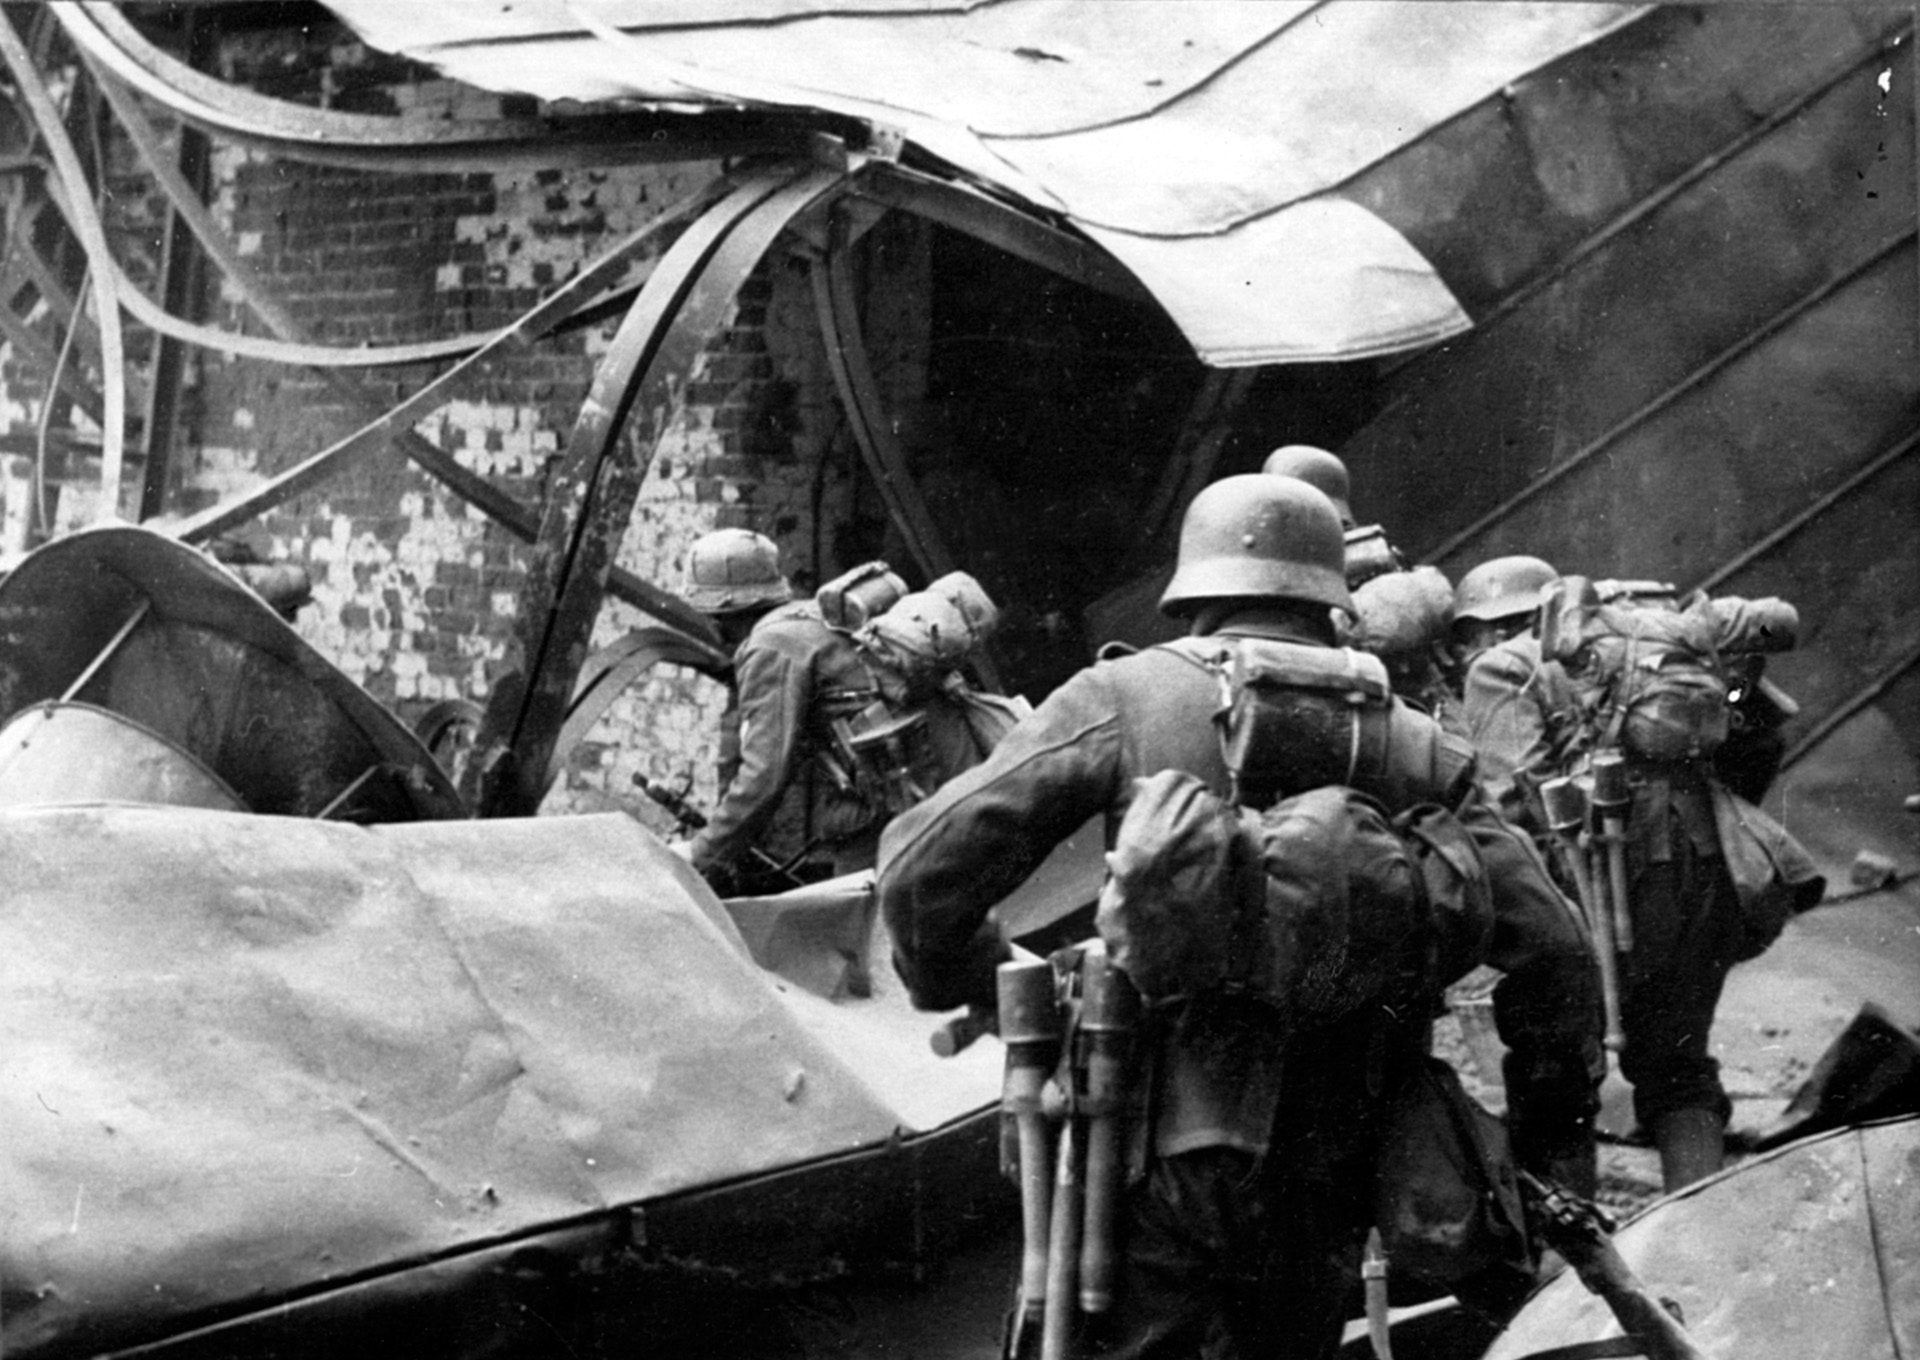 Exhausted by their protracted ordeal, German soldiers pick their way through the rubble of a demolished factory in Stalingrad.